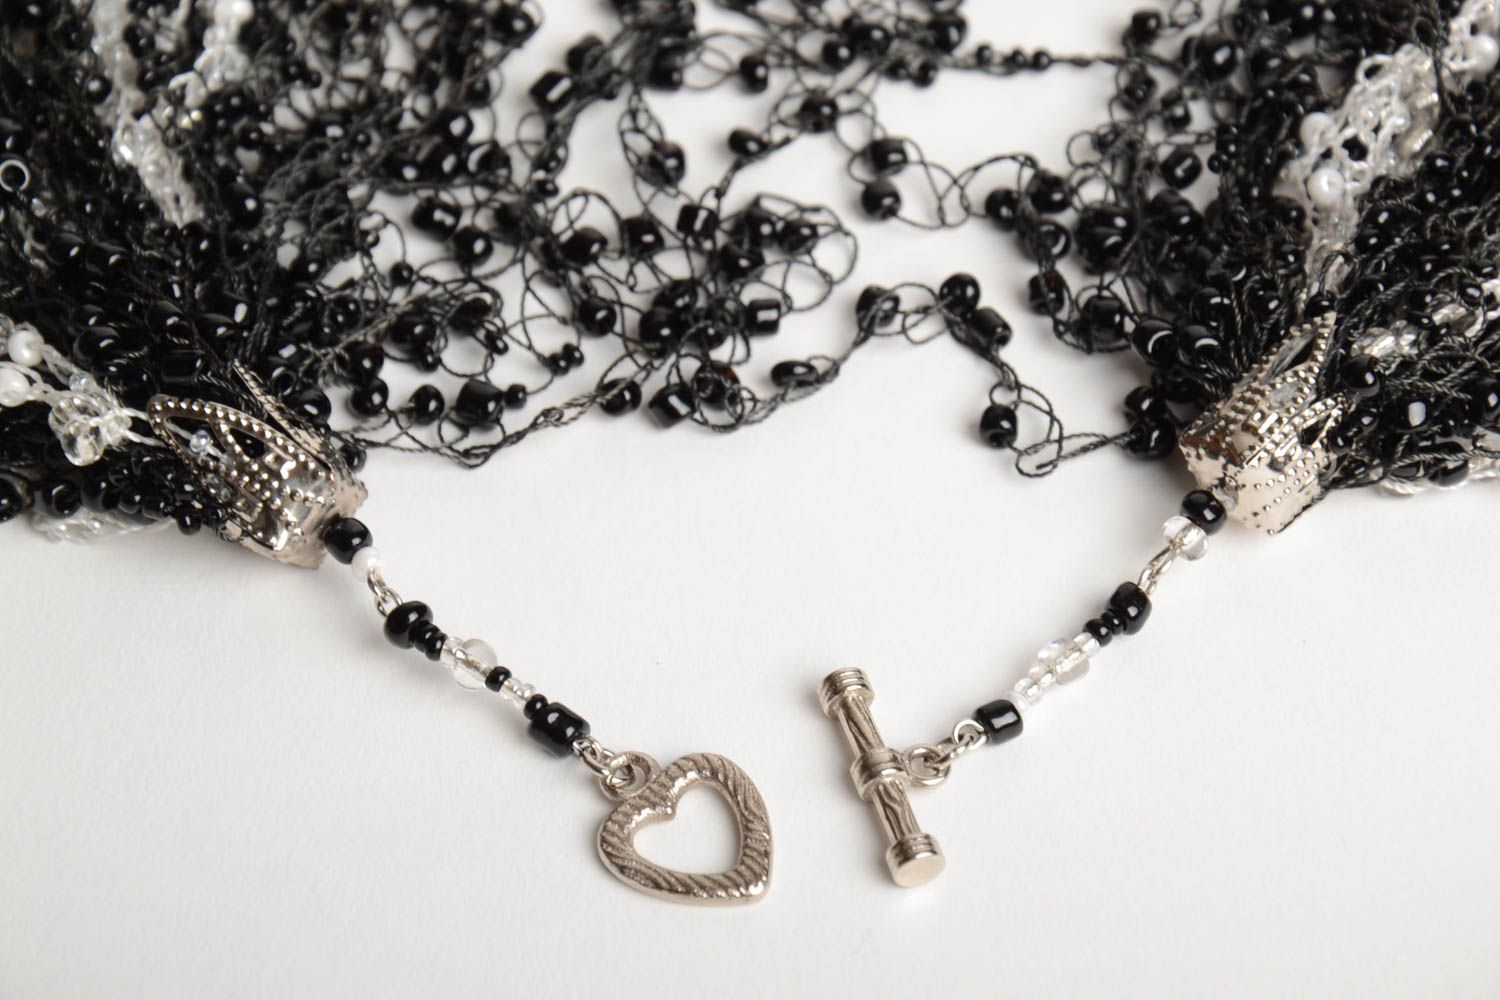 Handmade volume necklace crocheted of Czech beads in black and white colors photo 4